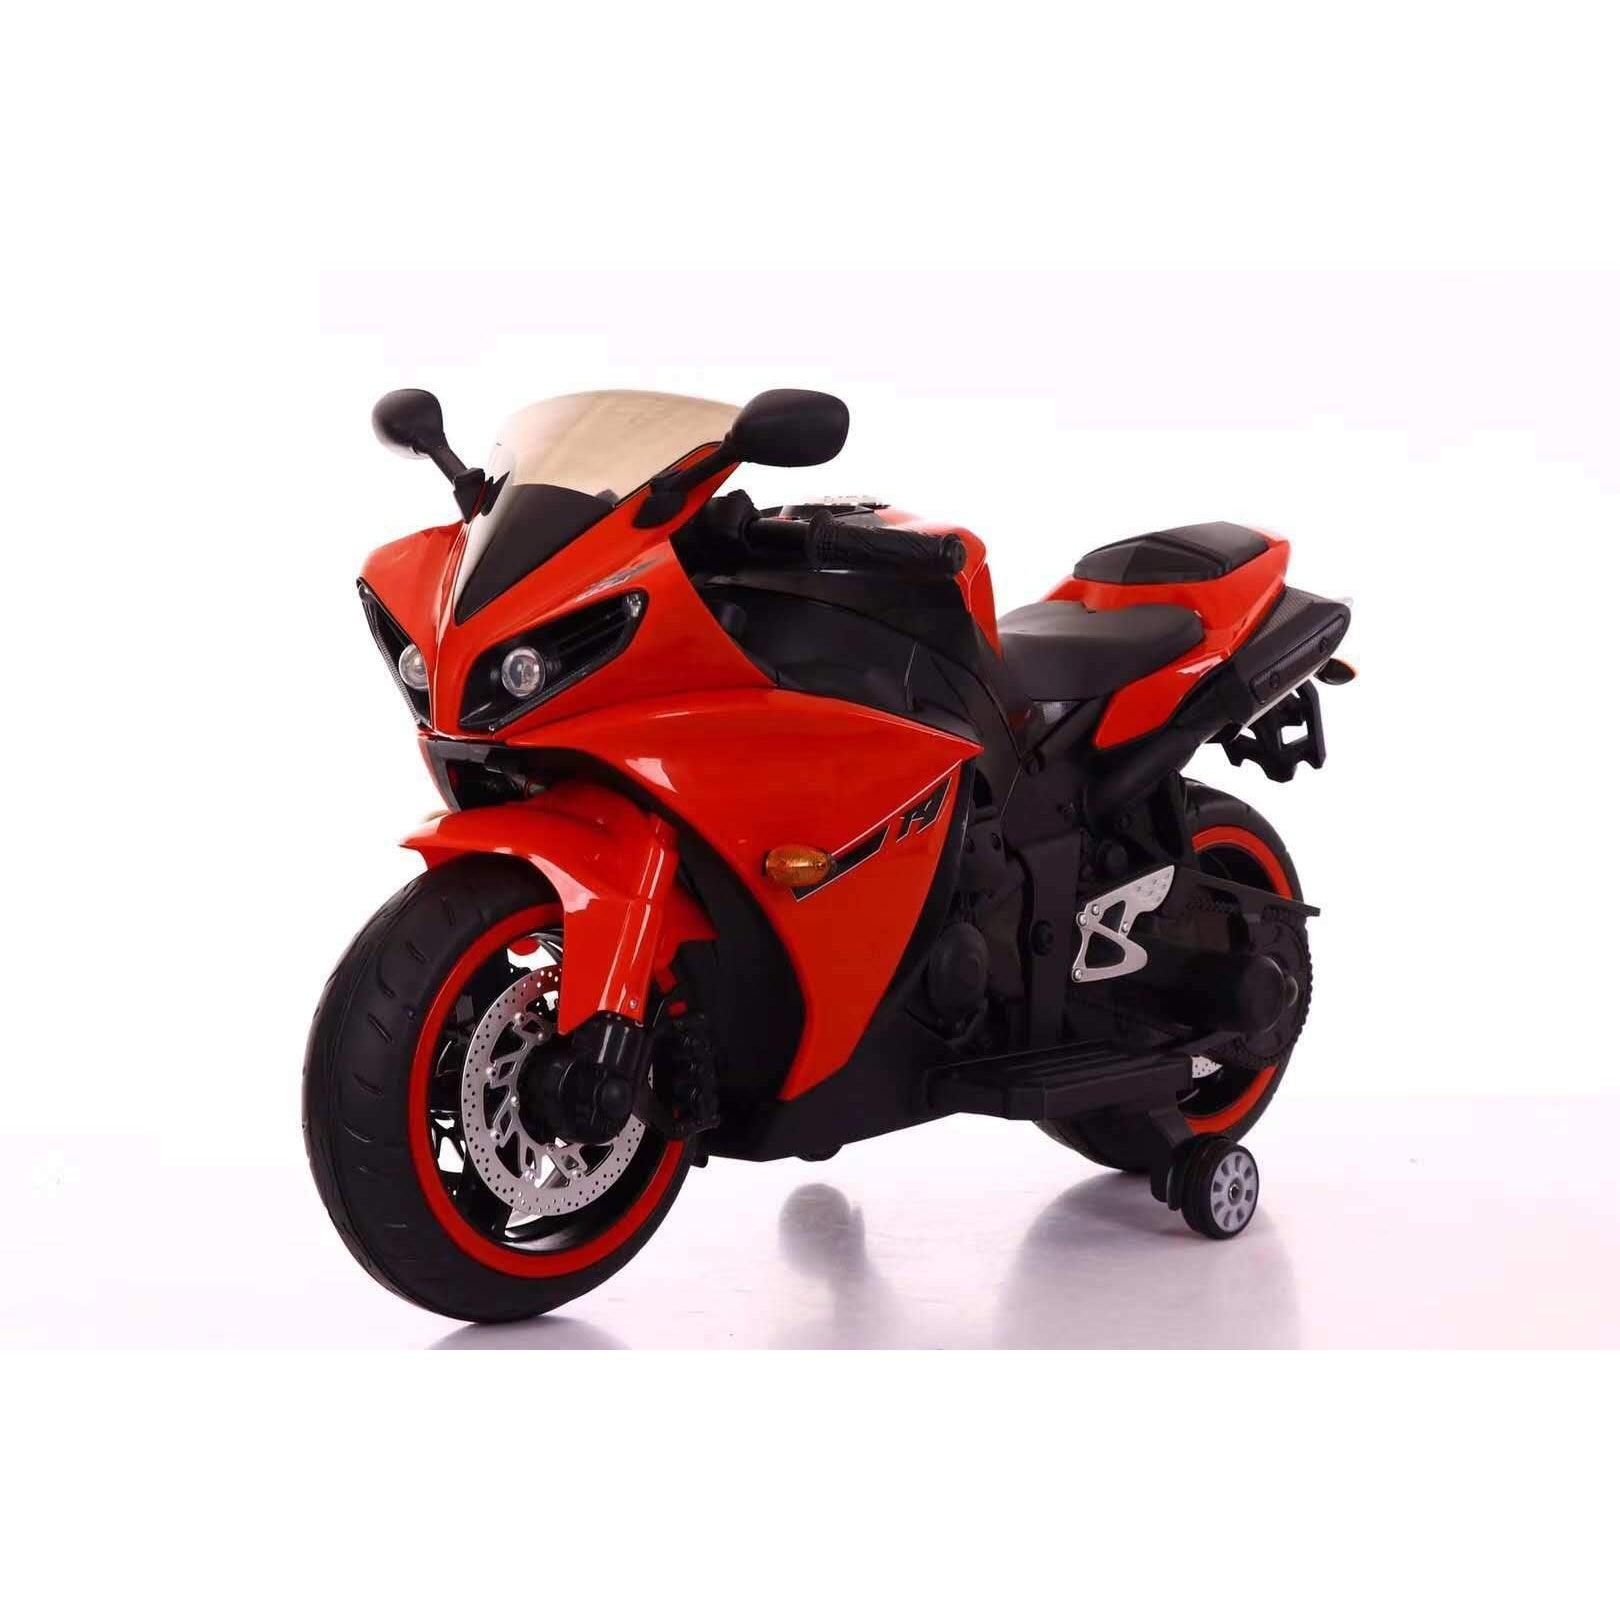 Yamaha R1 12V Battery Operated Motor Bike for Kids | Rechargeable Battery - 11Cart